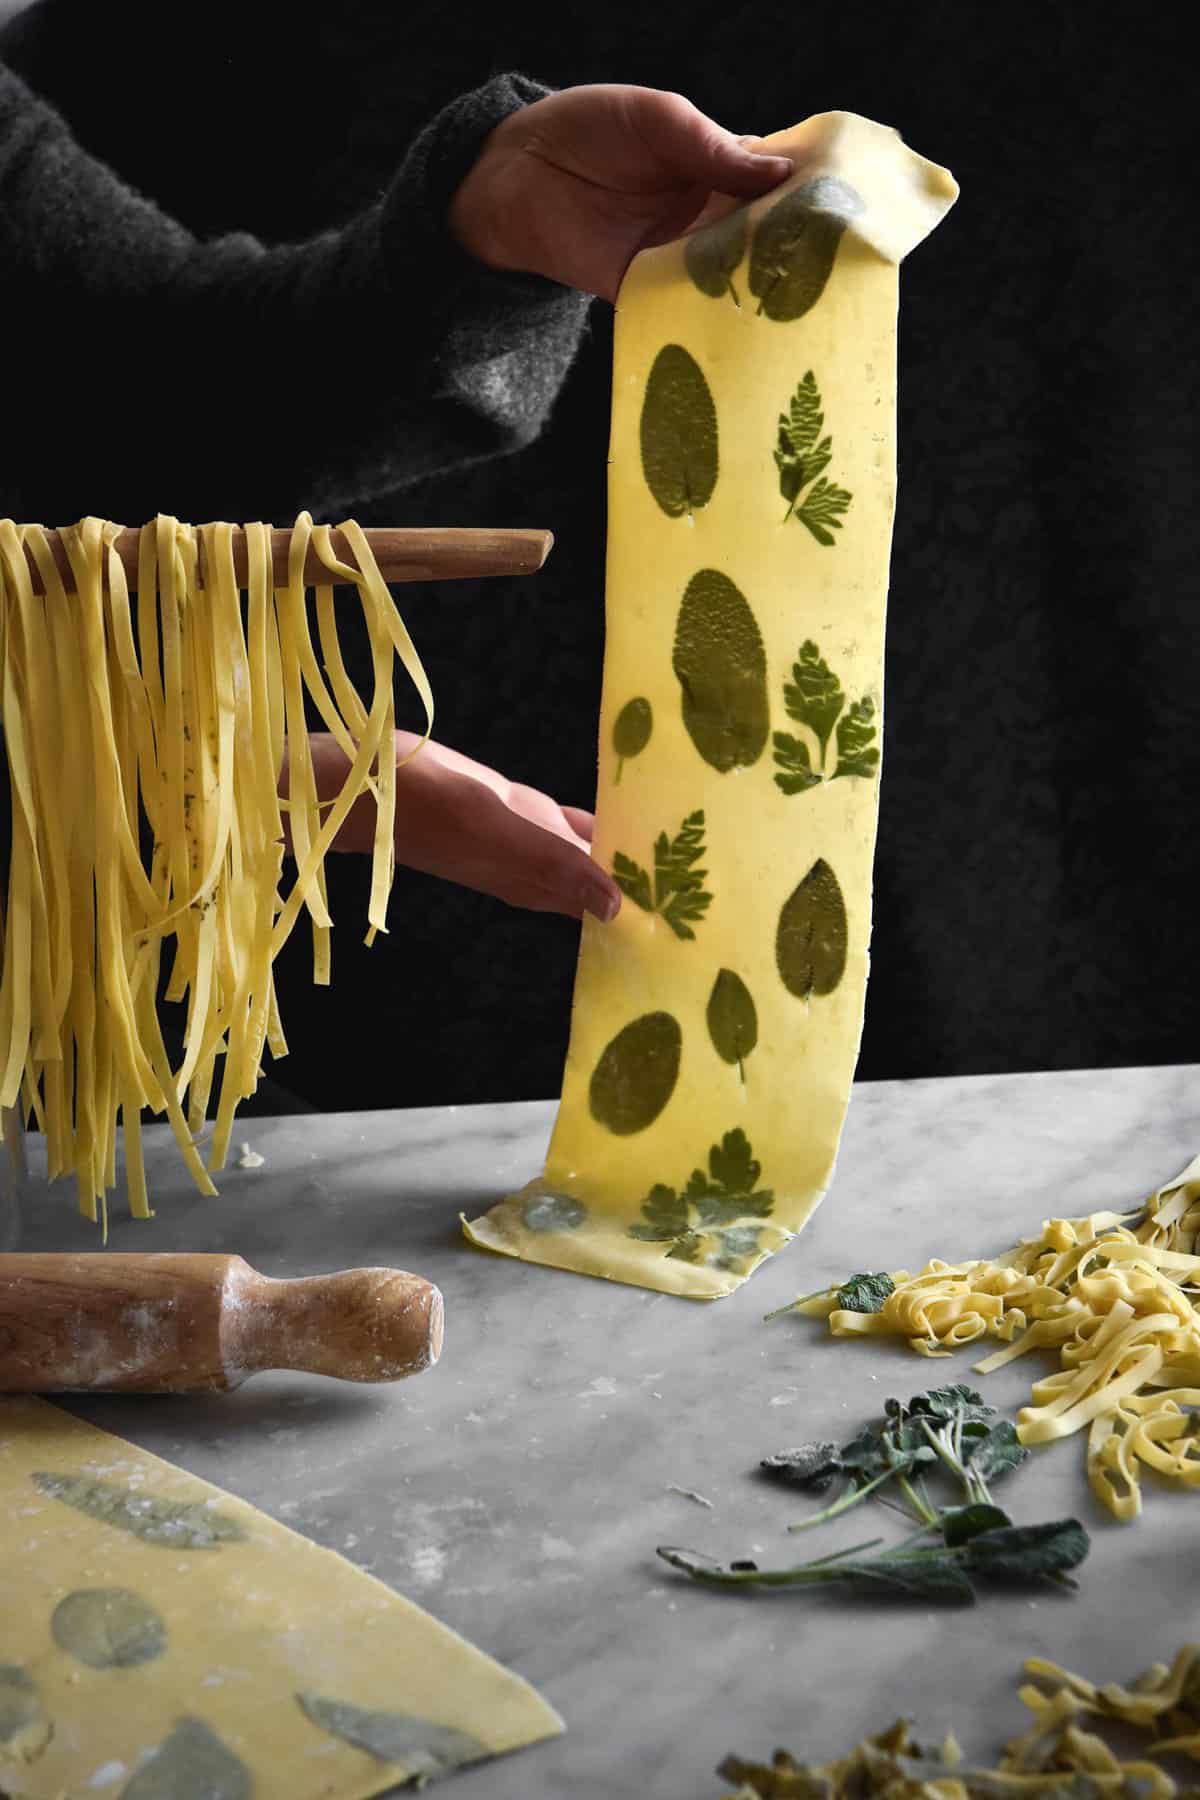 A moody scene of some gluten free egg pasta laminated with sage and parsley leaves. A hand holds the laminated pasta sheet to the right, while fresh fettuccine hands over a spoon to the left. The foreground is strewn with fresh pasta, sage leaves and extra pasta sheets.